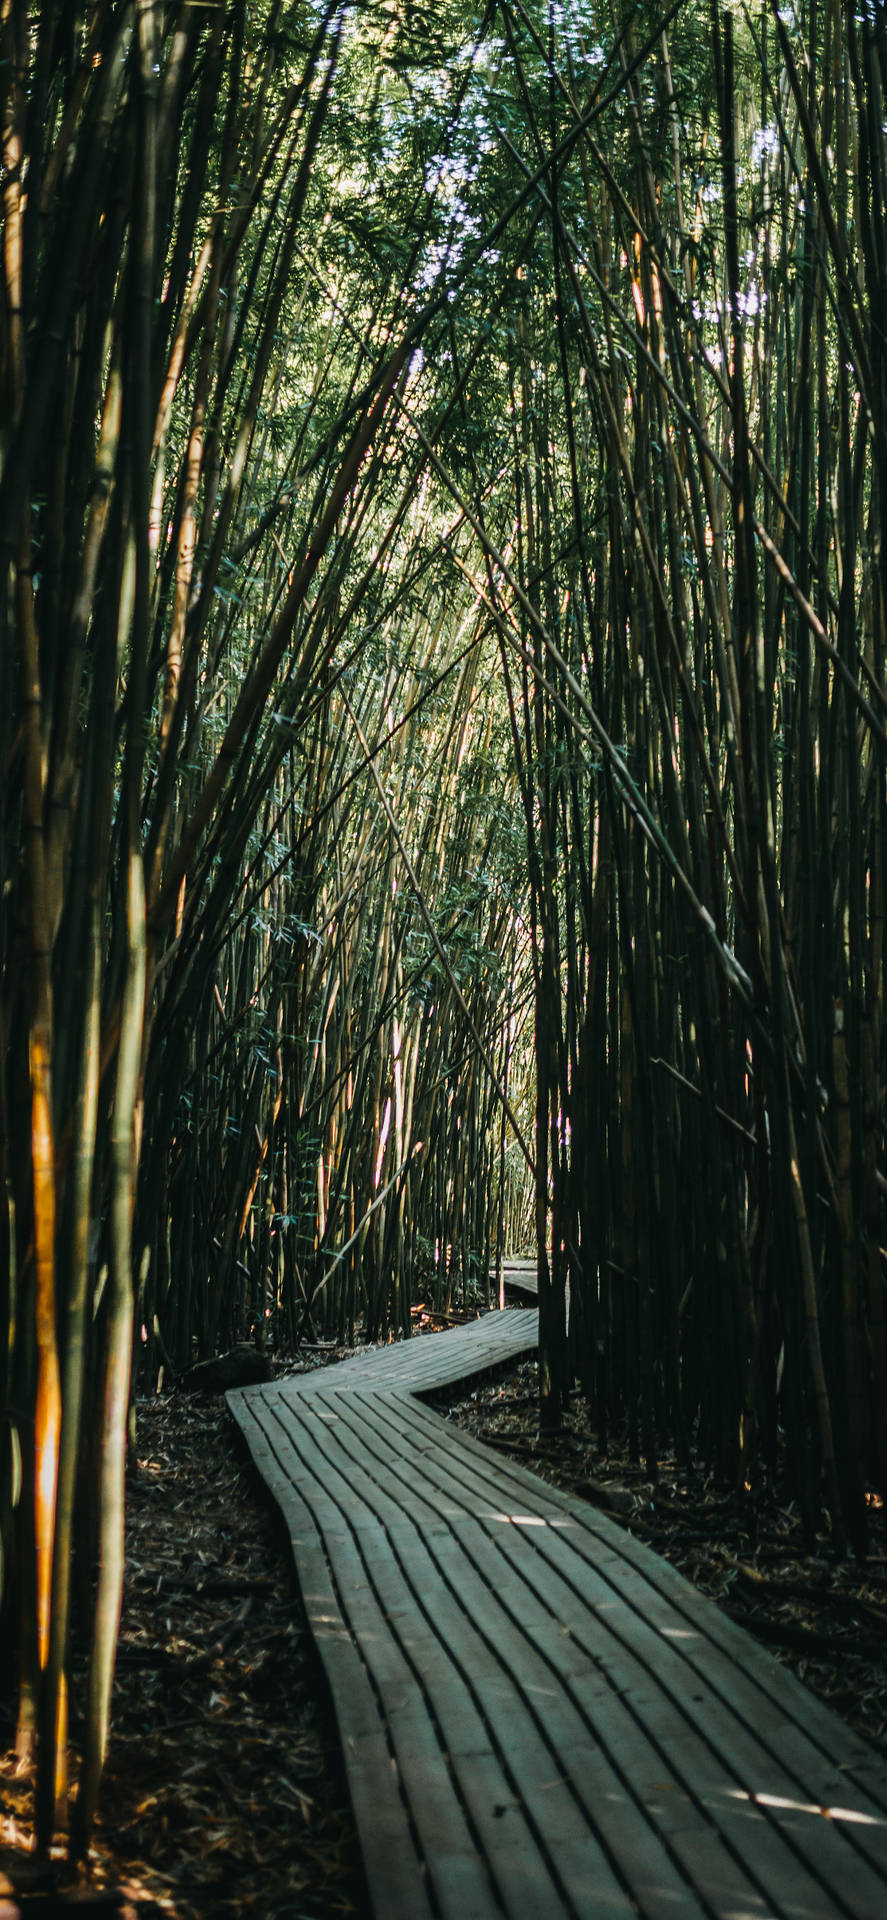 Paved Bamboo Pathway IPhone Wallpaper